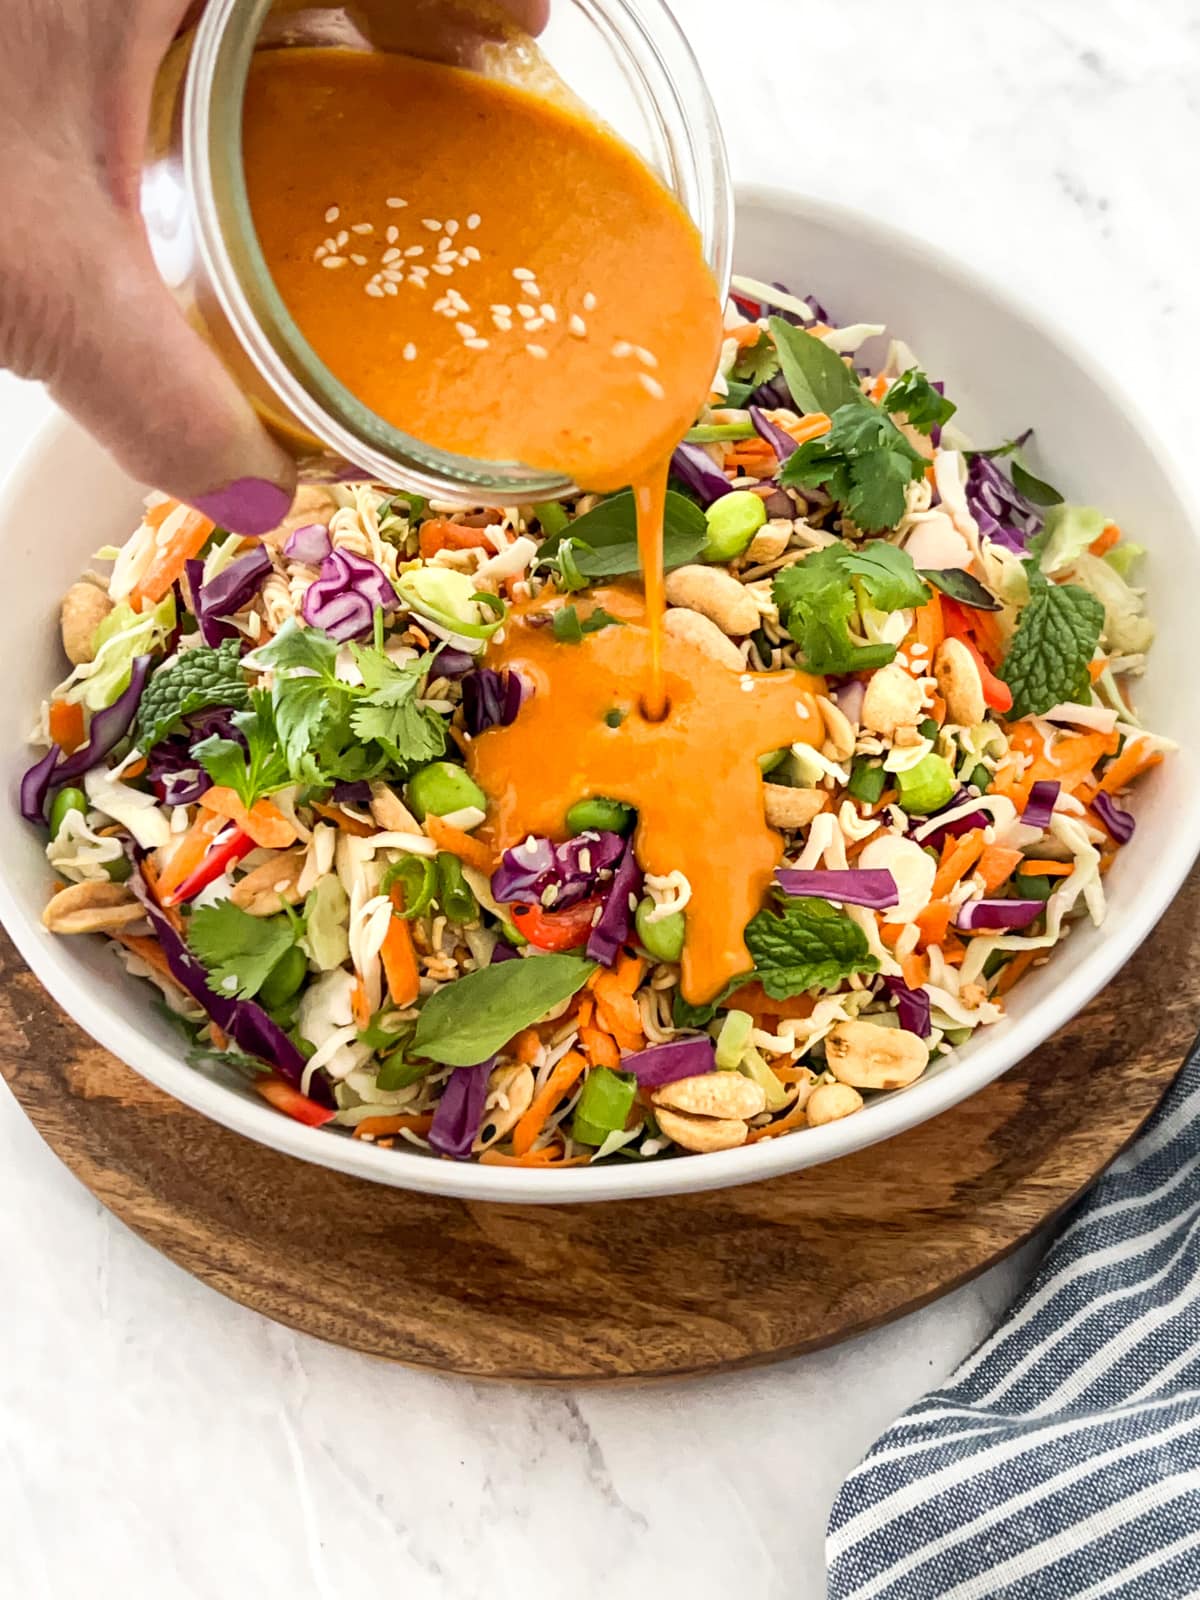 Asian carrot ginger dressing being poured over a bowl of slaw.